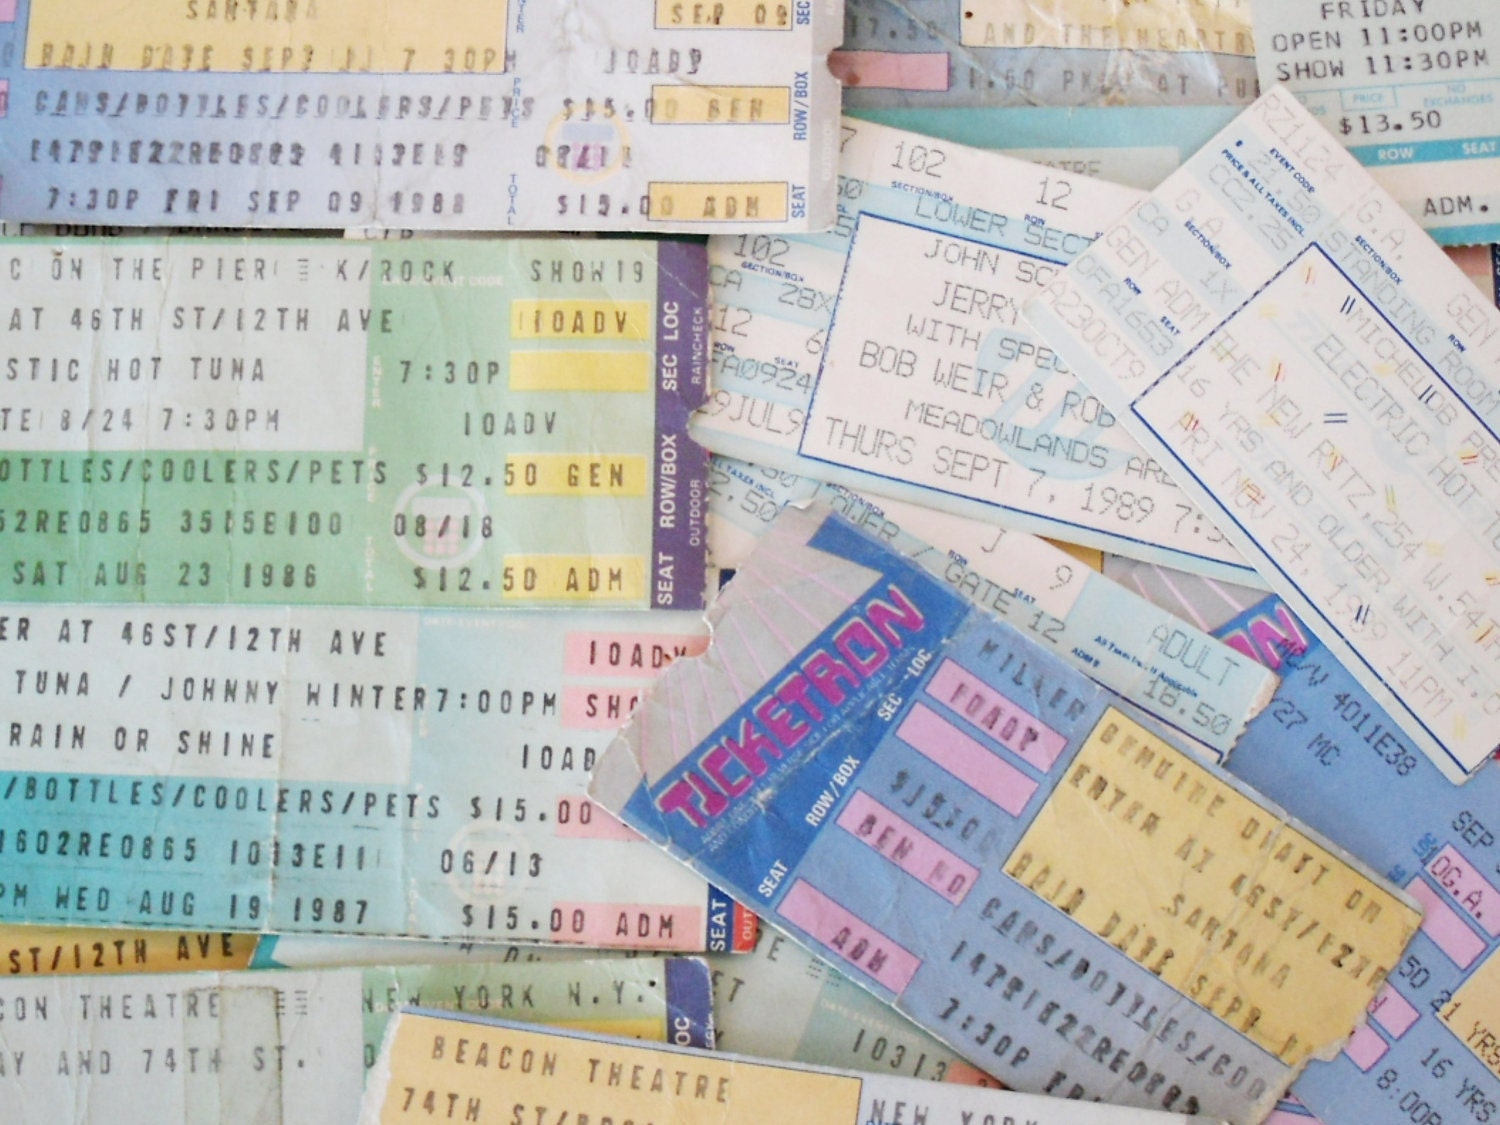 Lot Of Vintage Concert Ticket Stubs 1980s By Aliciarstangdesigns 